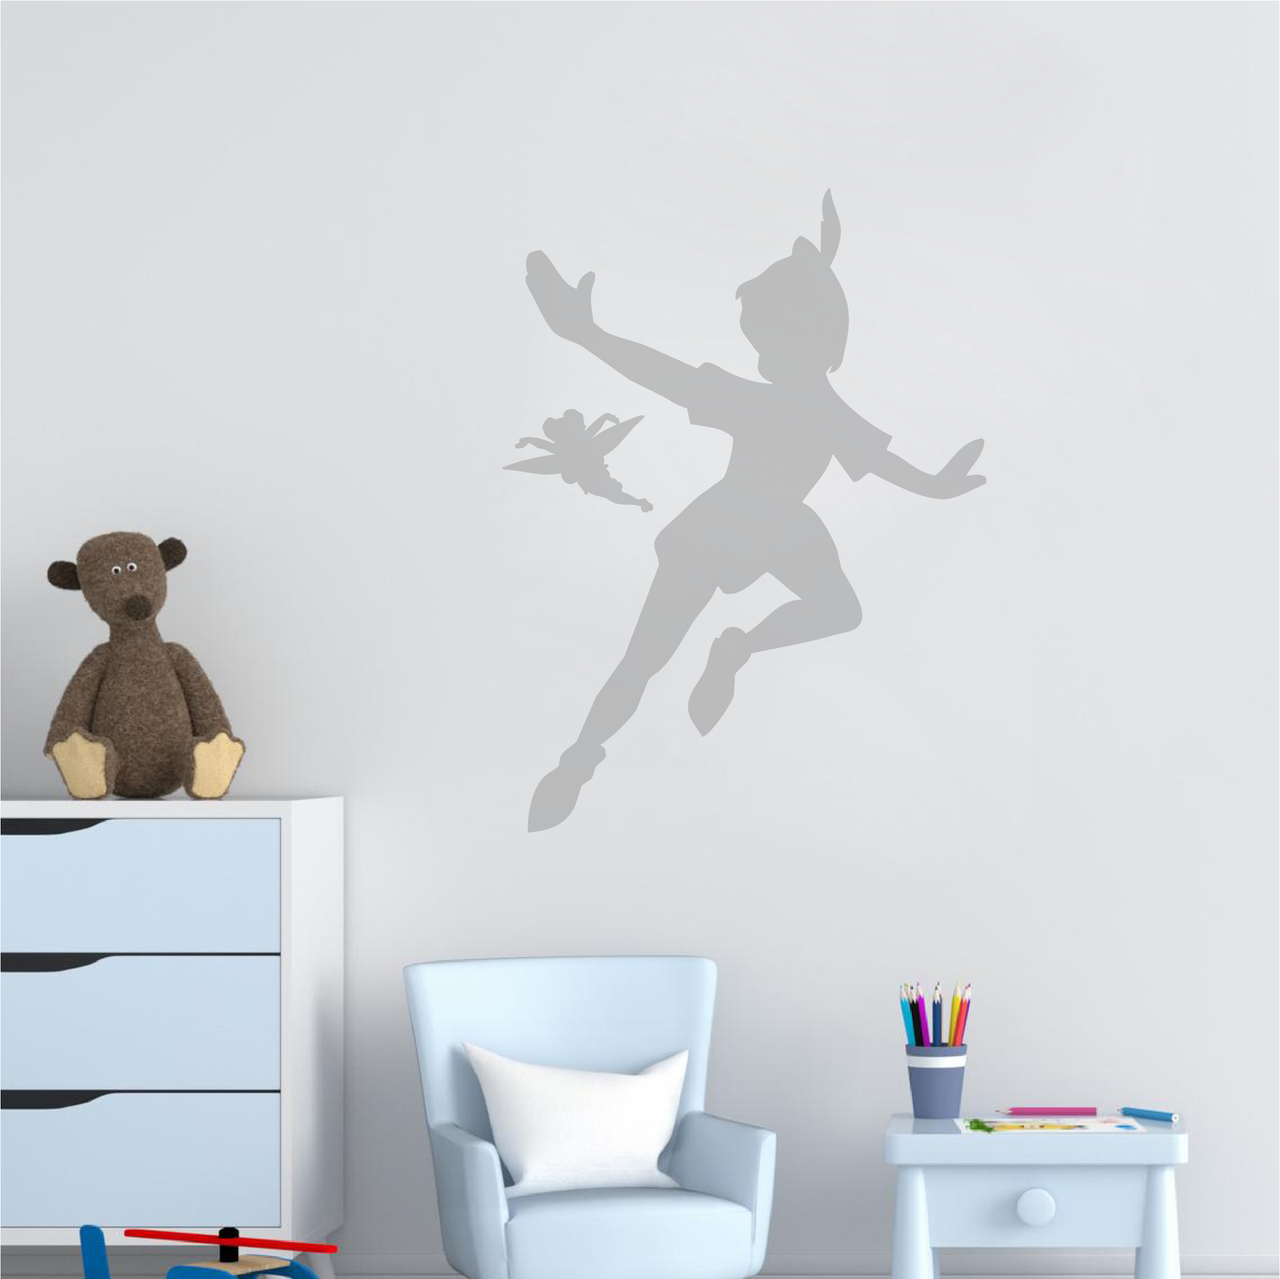 Peter Pan and Tinkerbell Flying - Wall Decal